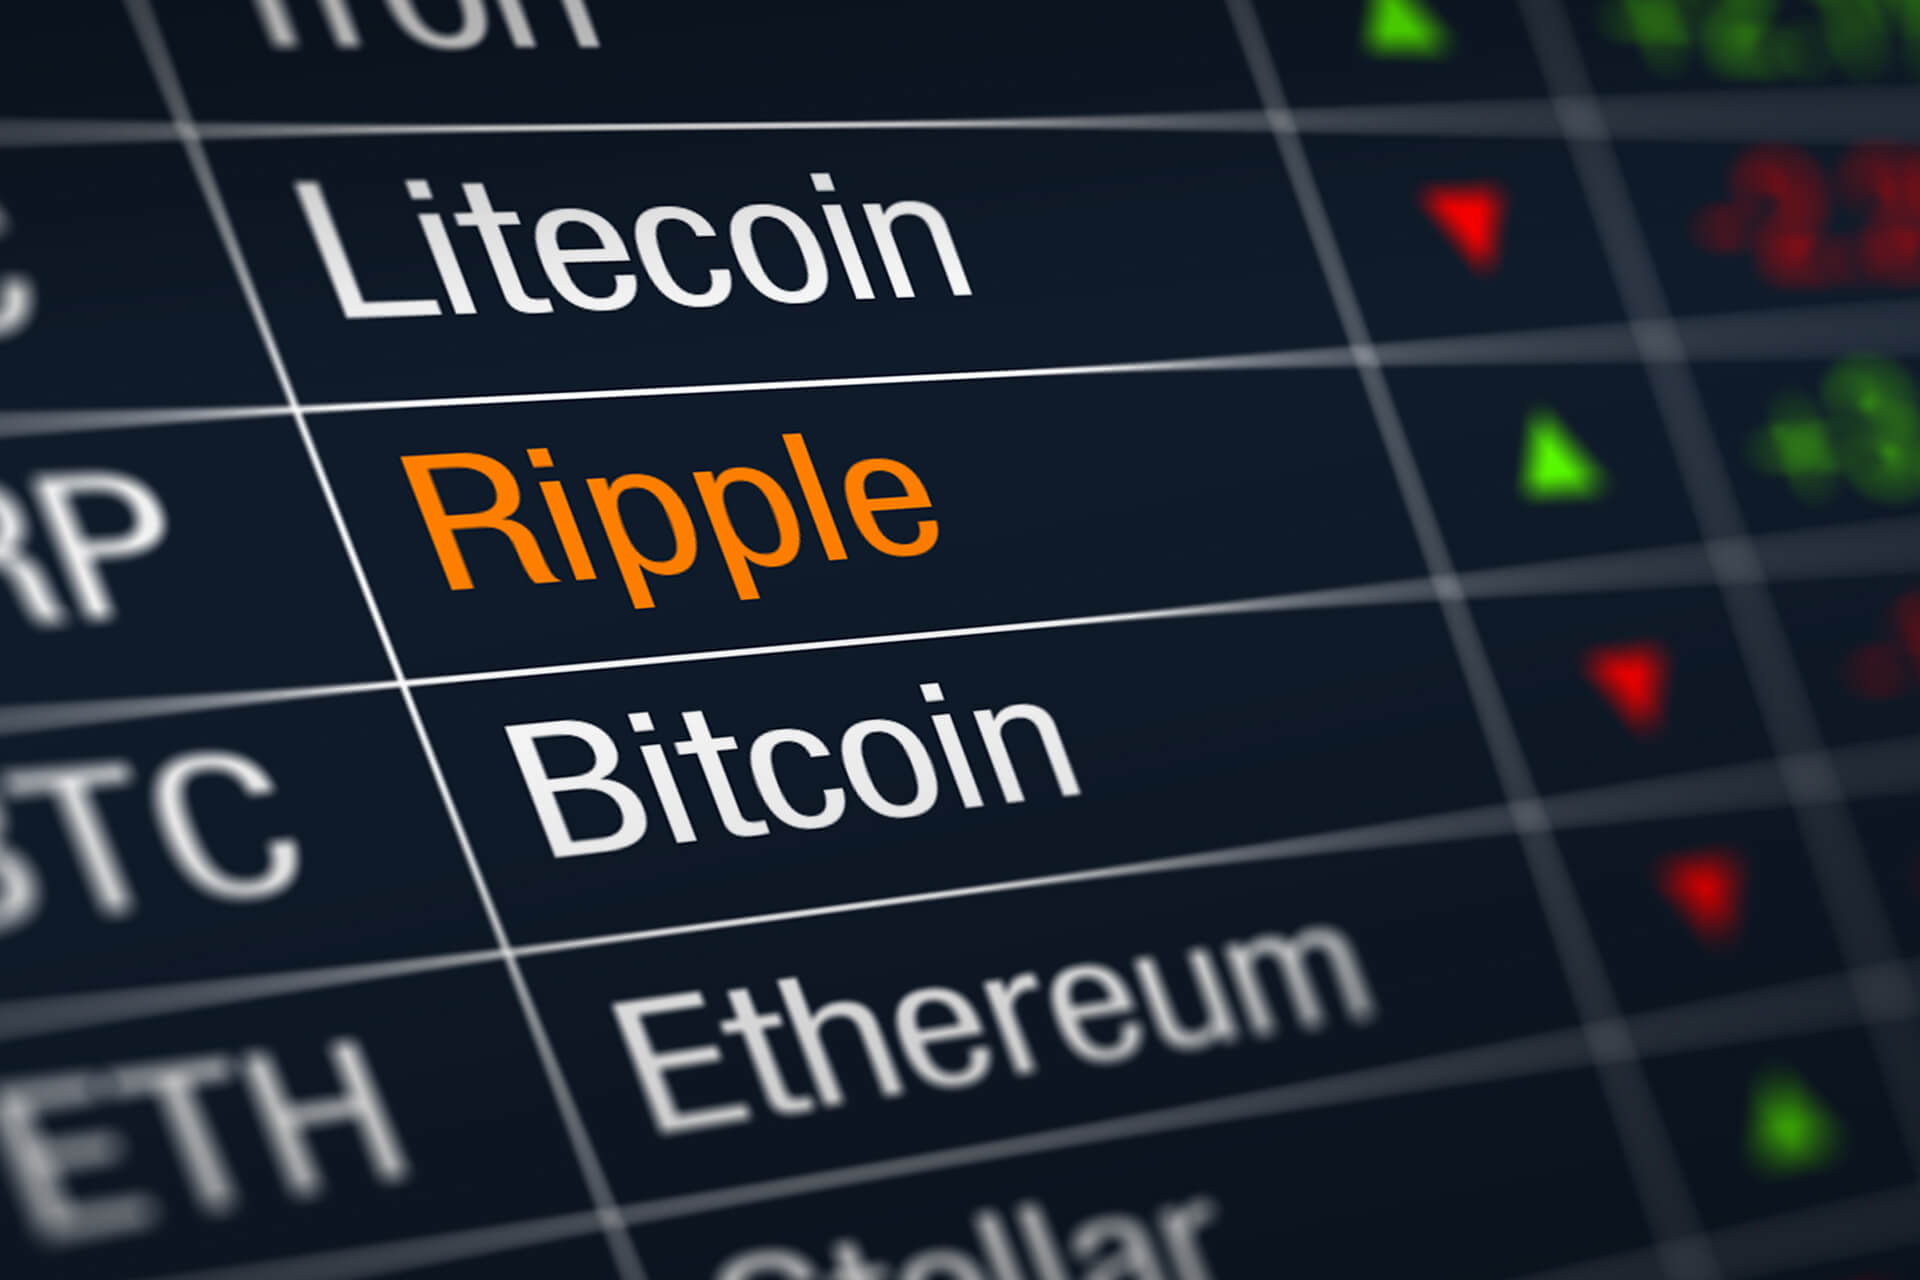 Ripple cryptocurrency price increase free image download